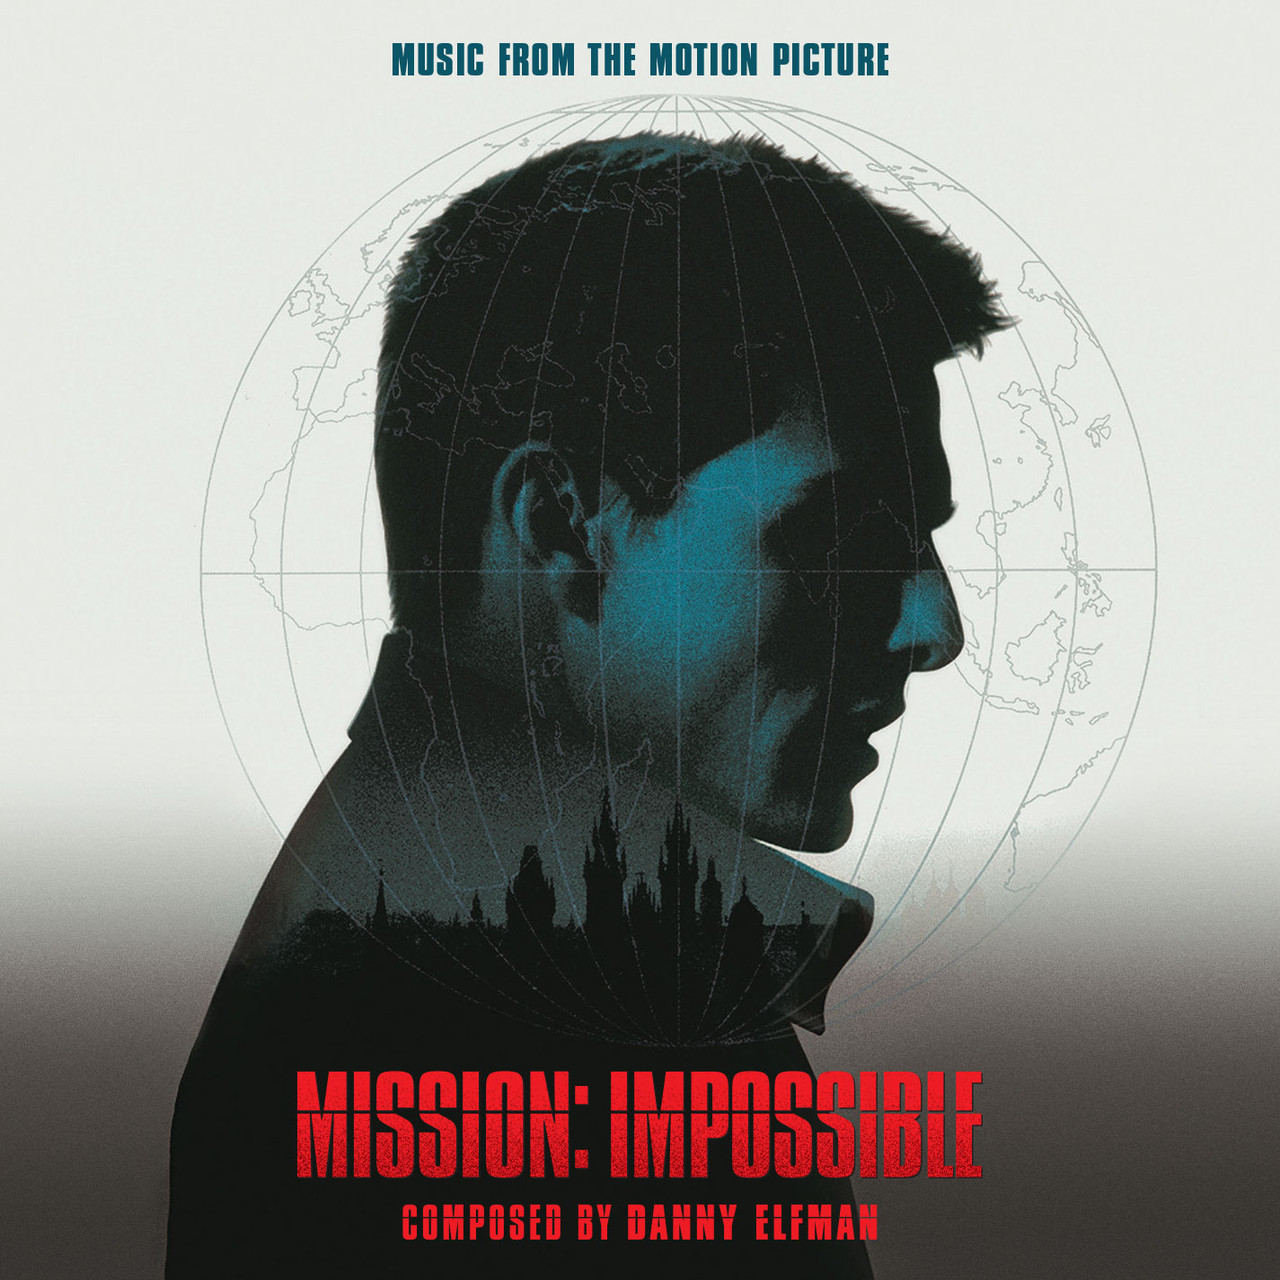 missionimpossible-cover__27129.156813774